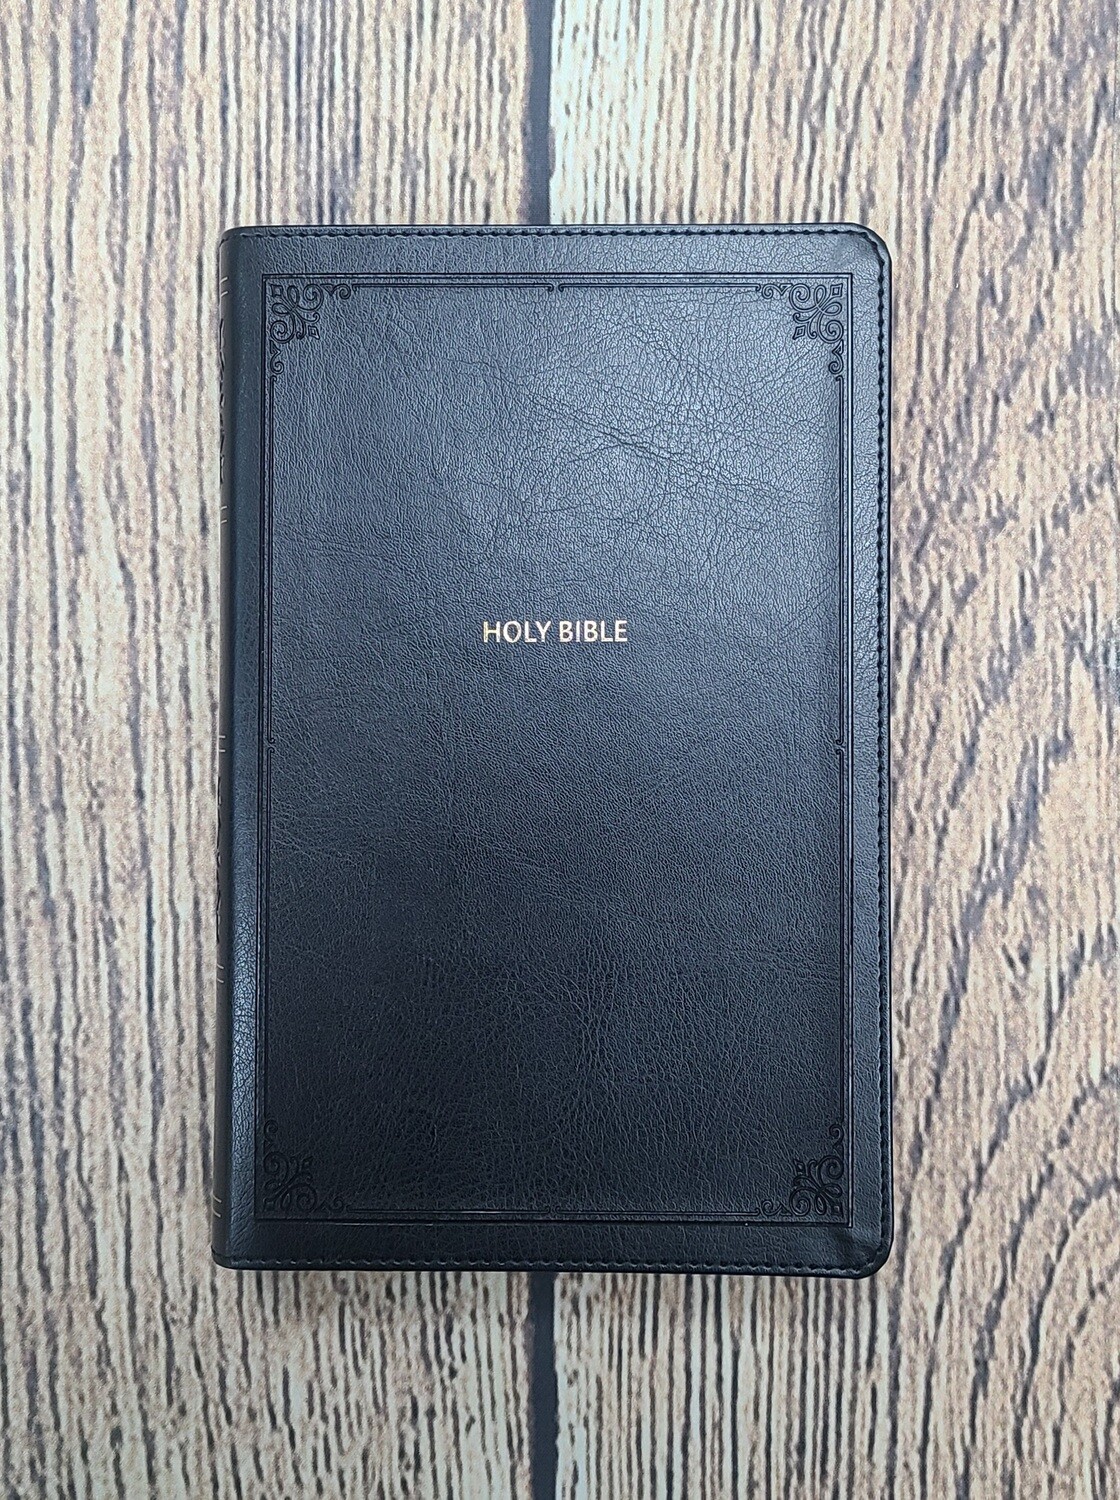 NKJV Personal Size Large Print Reference Bible - Black Leathersoft - Thumb Indexed